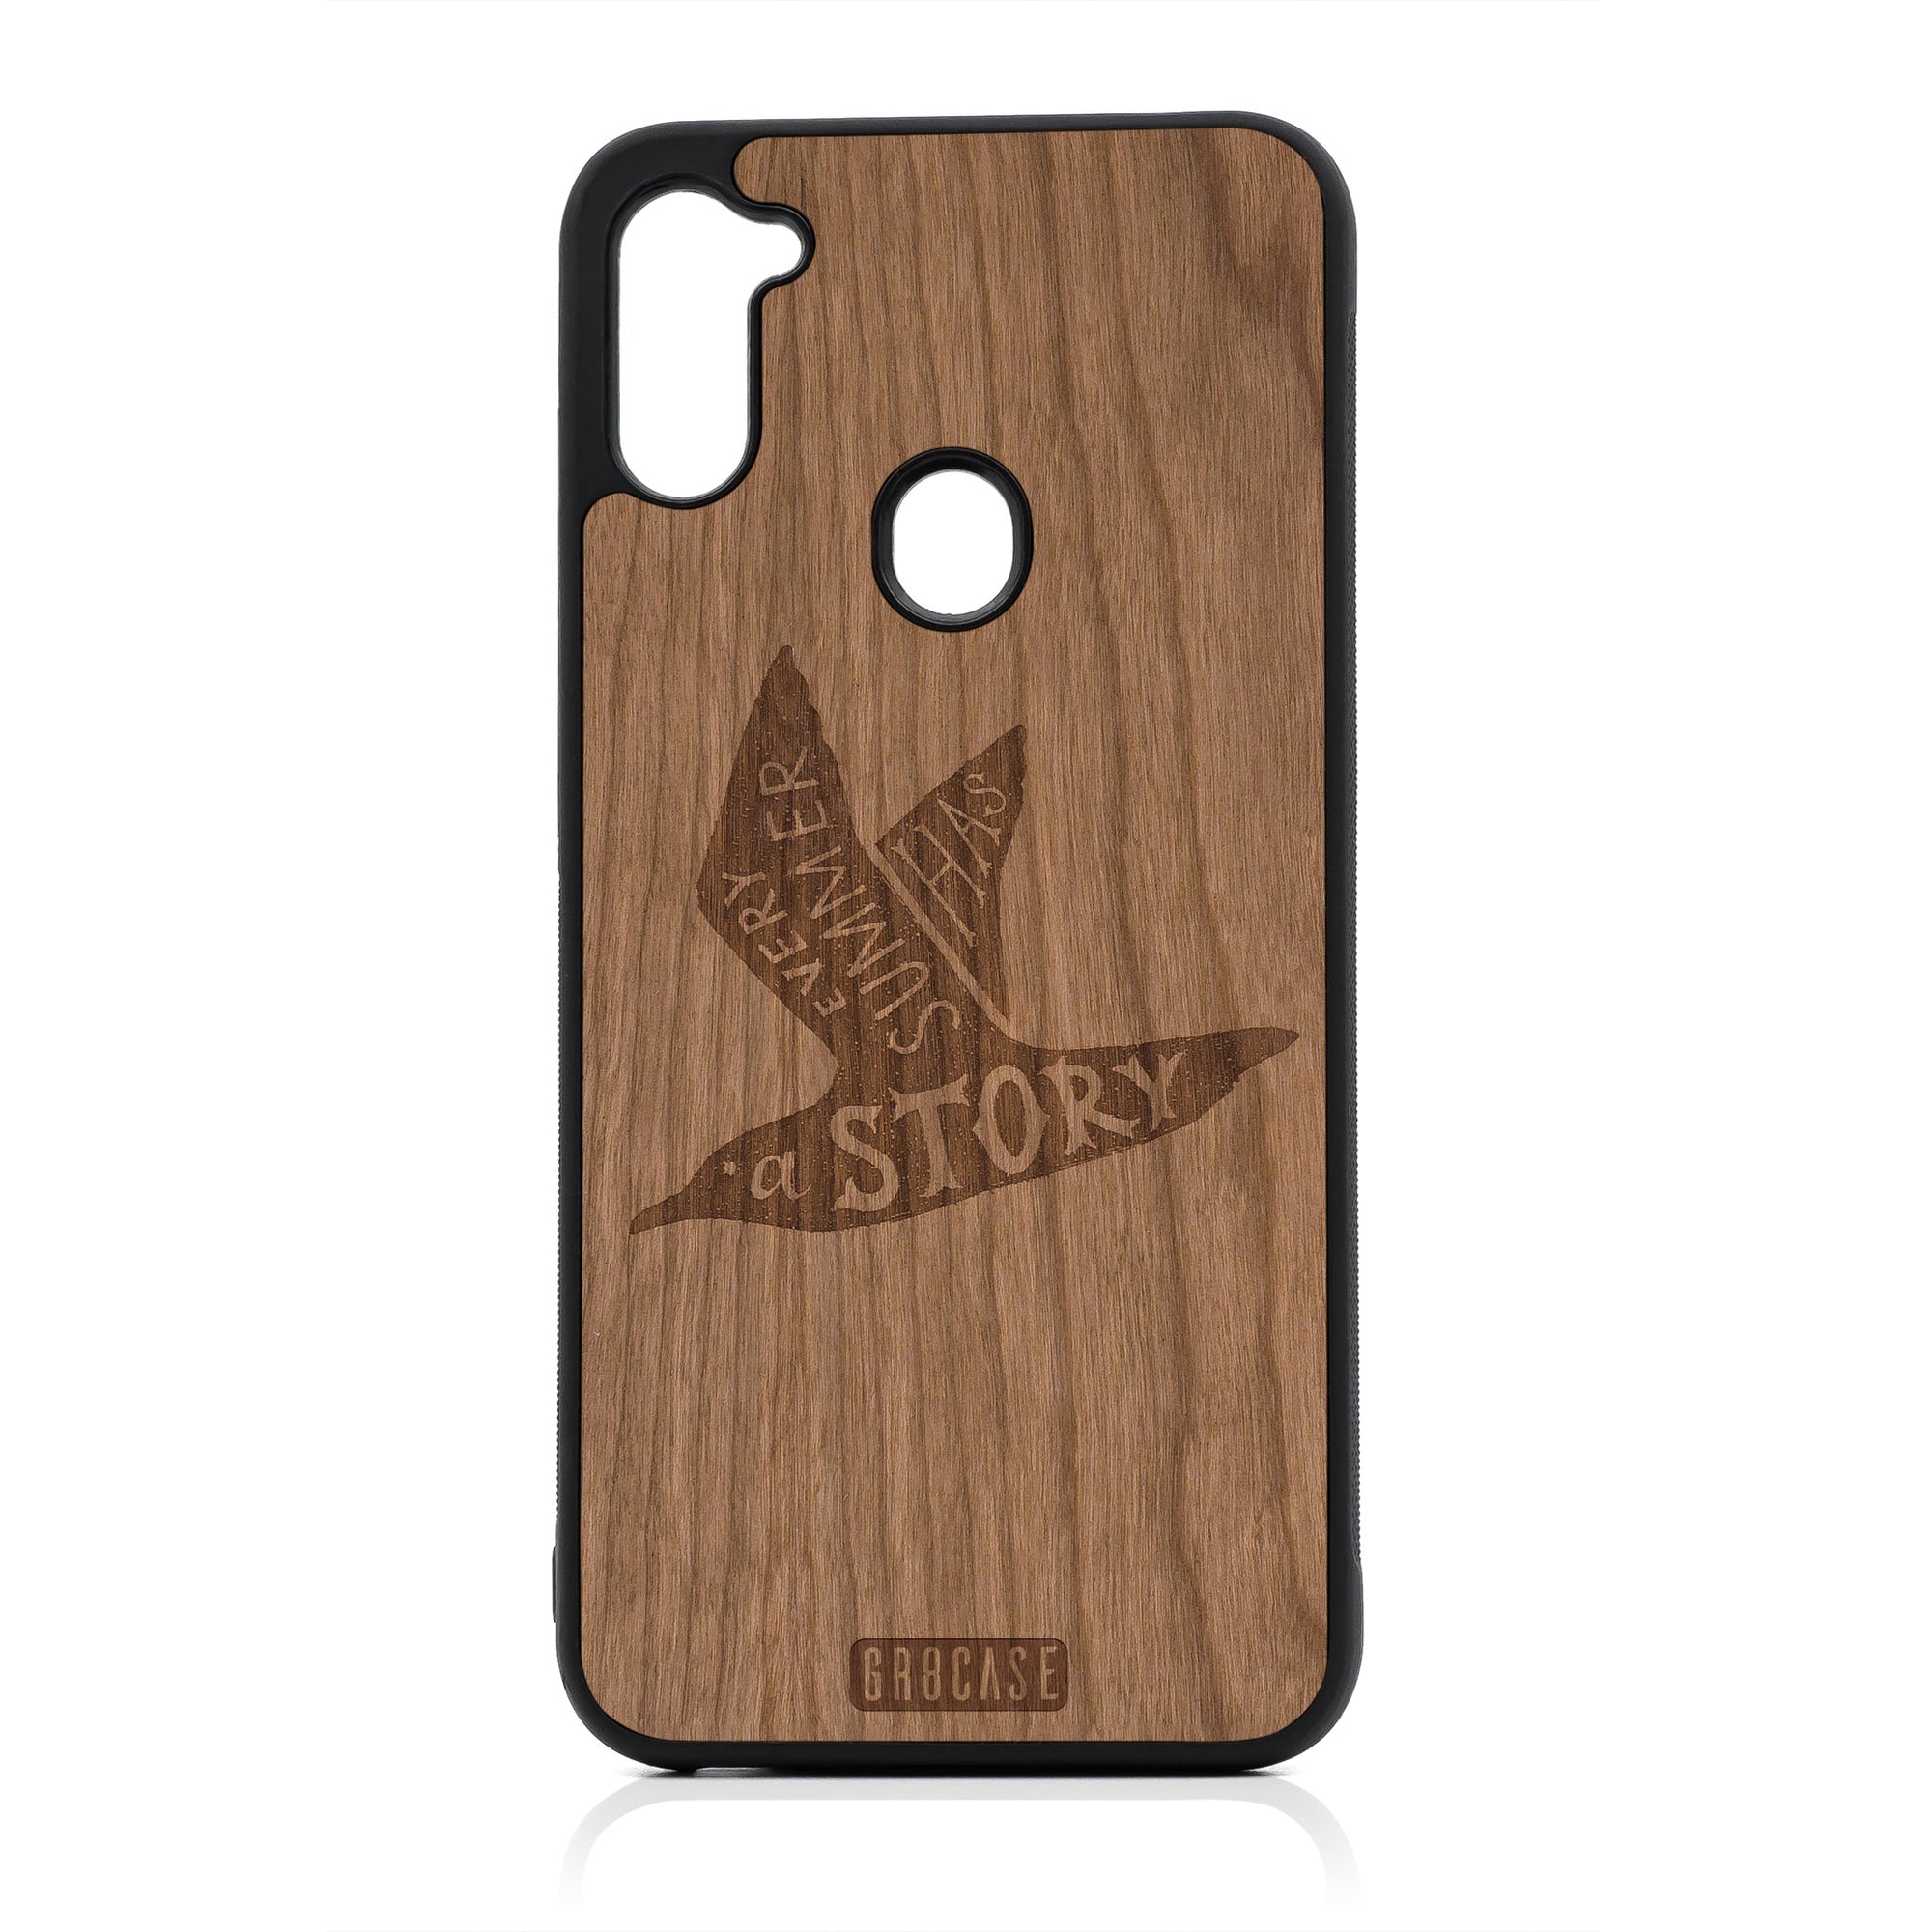 Every Summer Has A Story (Seagull) Design Wood Case For Samsung Galaxy A11